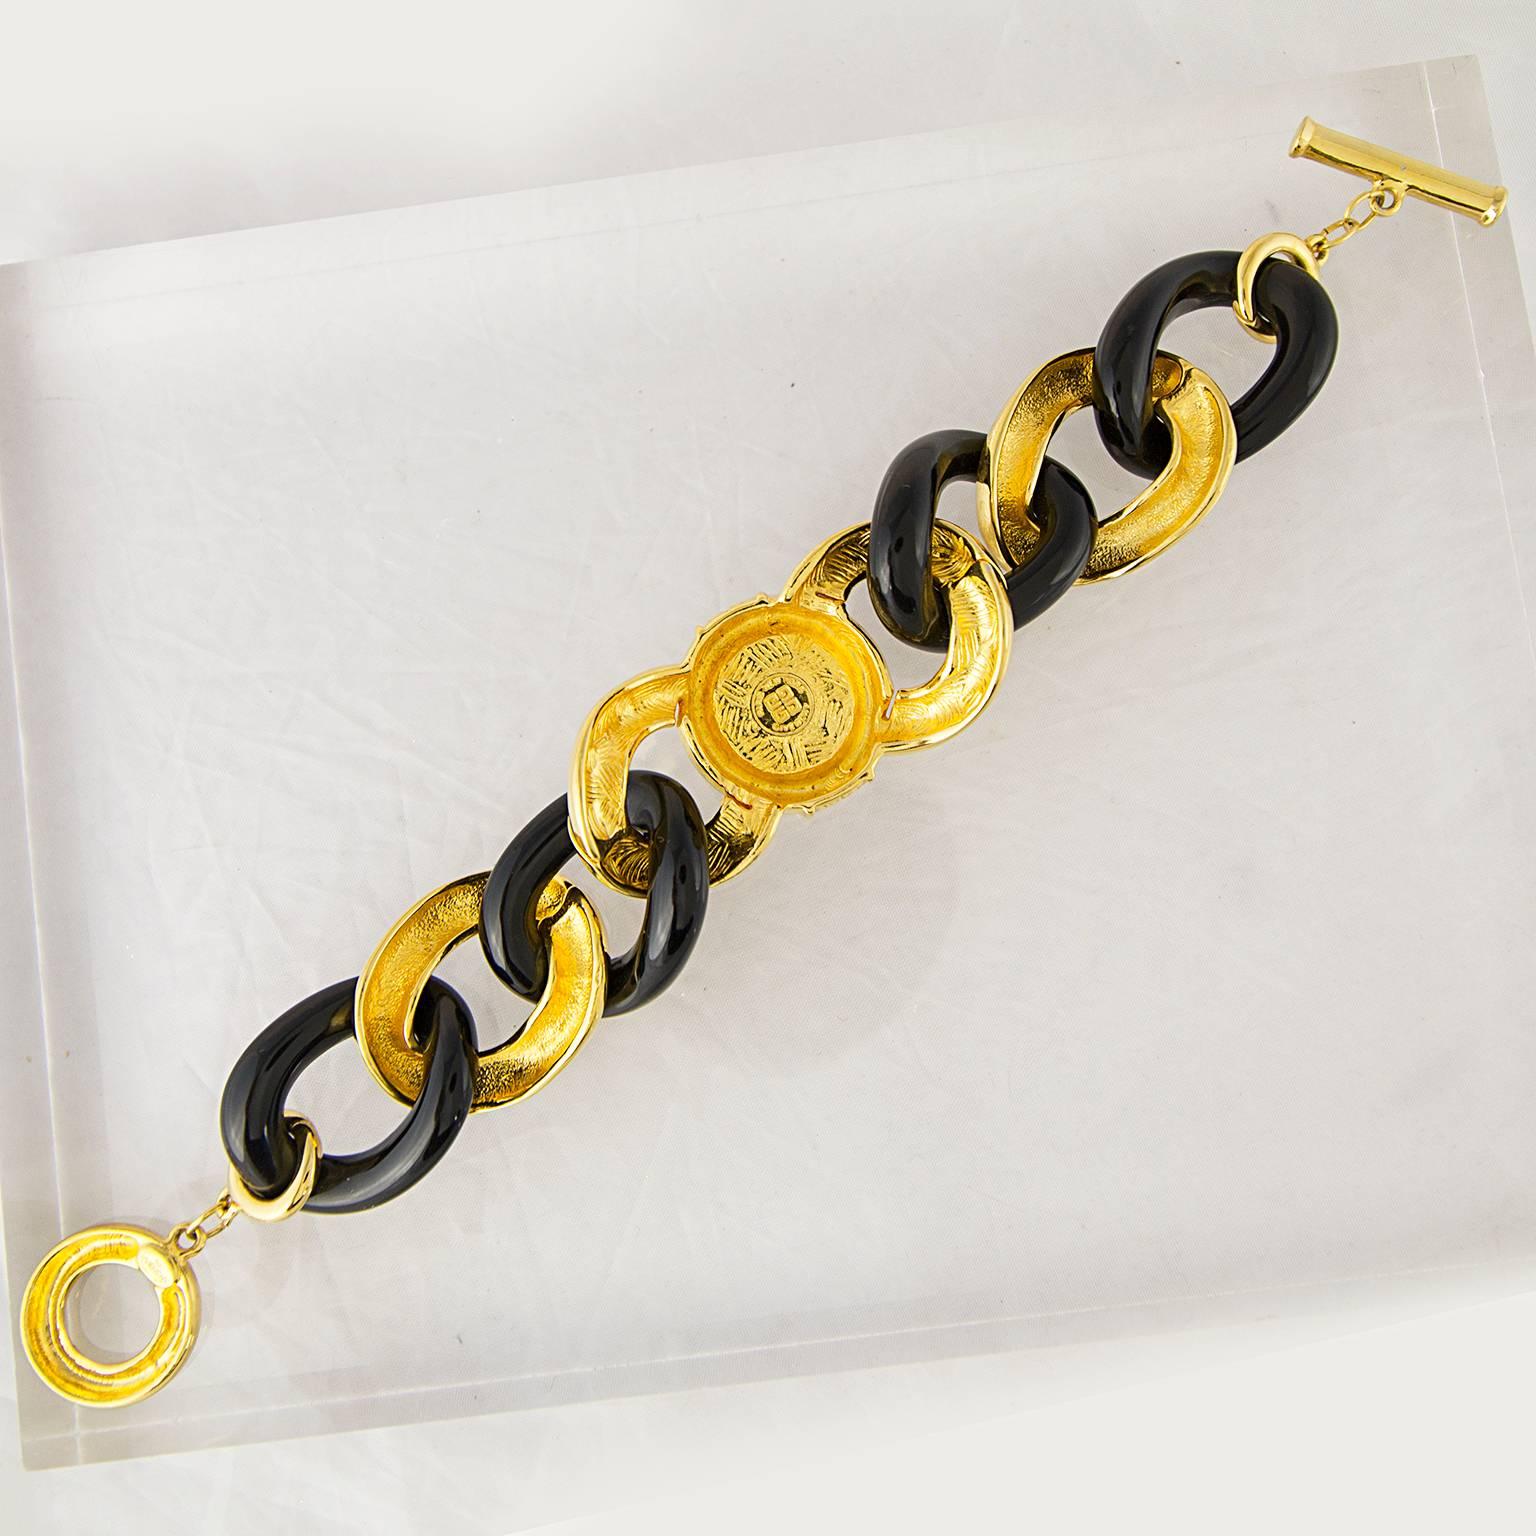 A fashionable Givenchy chain bracelet in gold plated metal and black resin with faux pearl and logo detail.
Fully signed. 
In a fantastic like new condition. 
Don't hesitate to contact us with any queries or image requests.